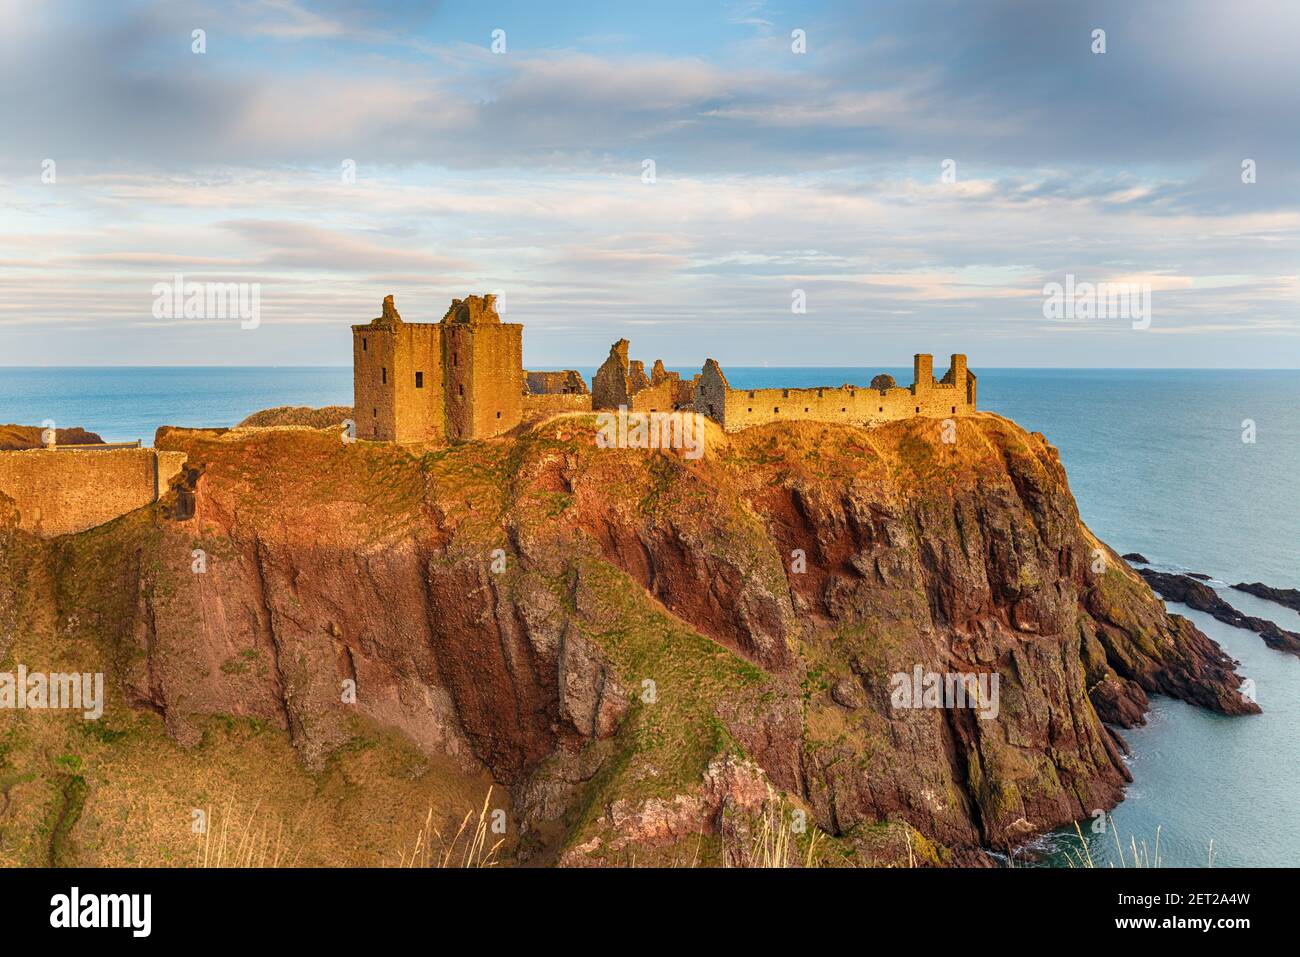 Dunnottar Castle near Stonehaven on the east coast of Scotland bathed in the evening light Stock Photo